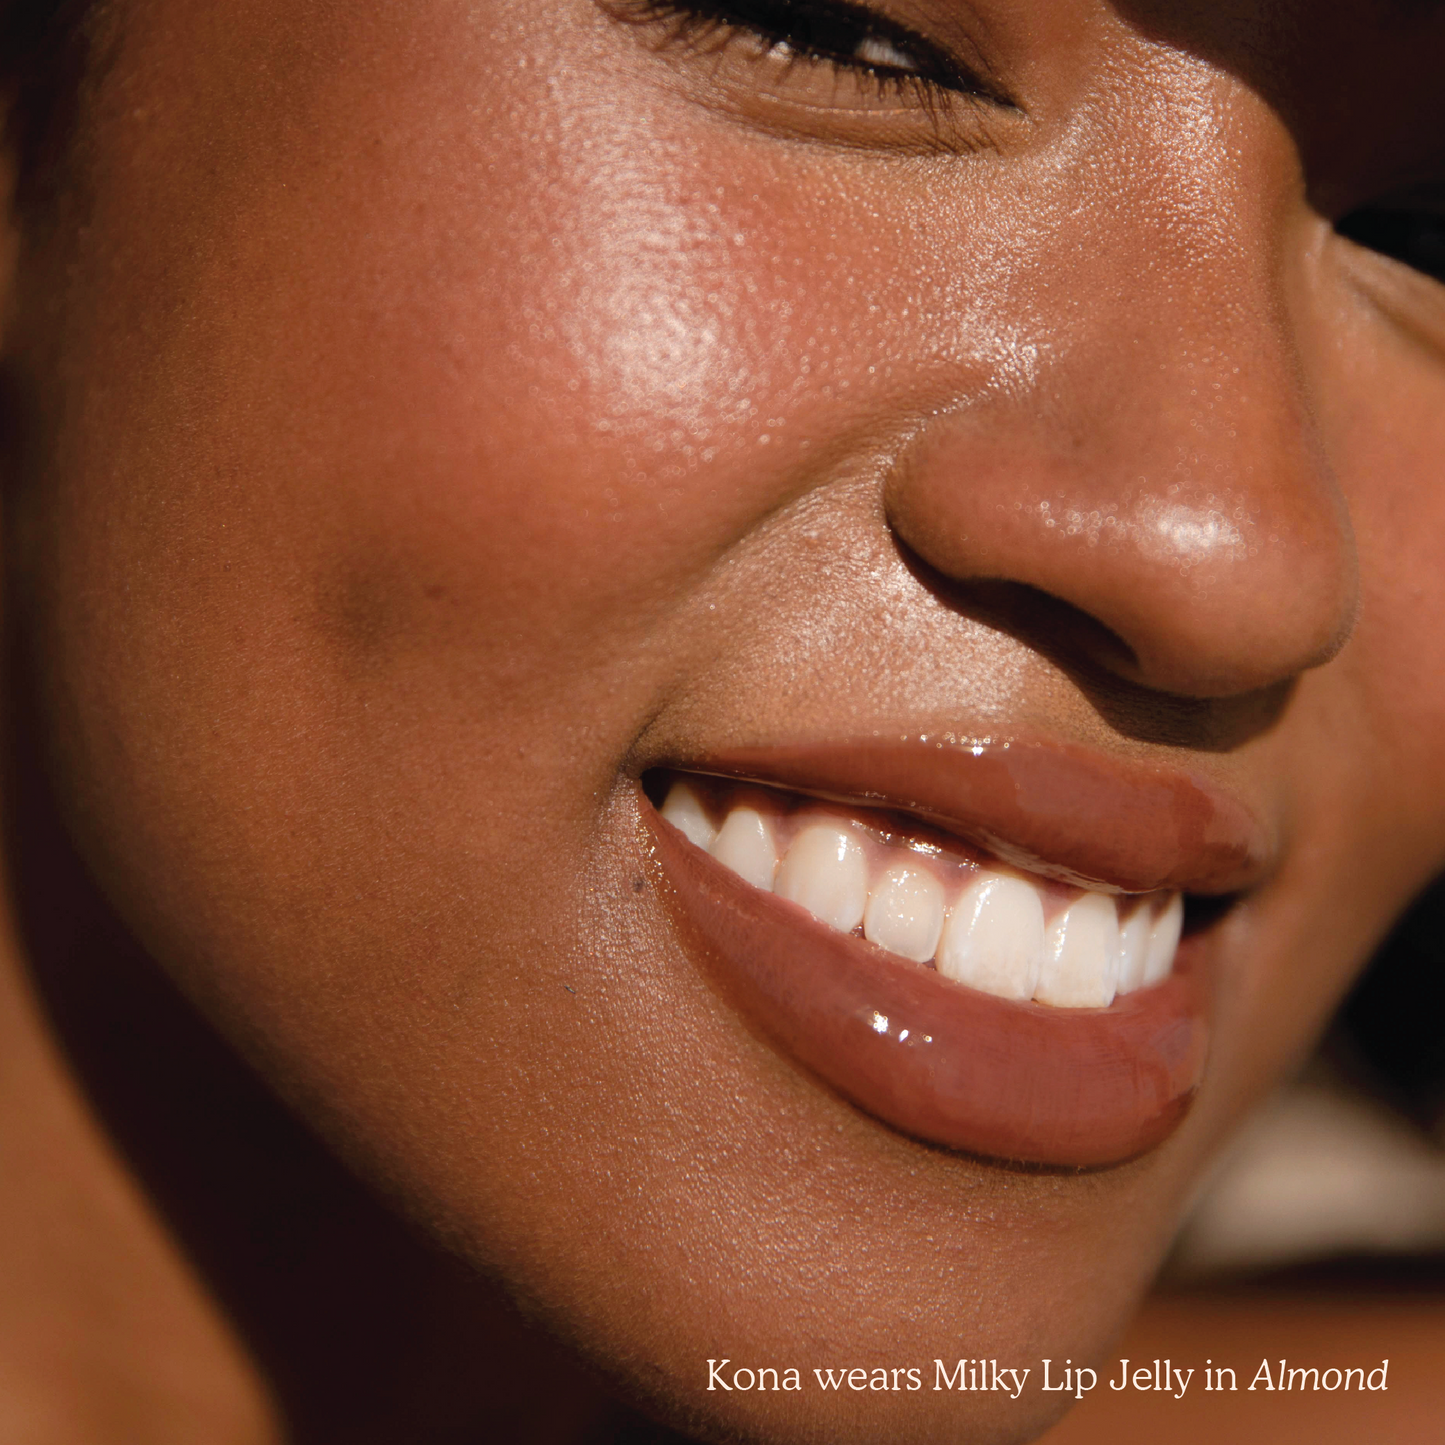 [Shared - Closeup photo of a girl with very glossy lips, wearing the Tower 28 Beauty ShineOn Milky Lip Jelly shade in Almond (a milky chocolate-brown)]